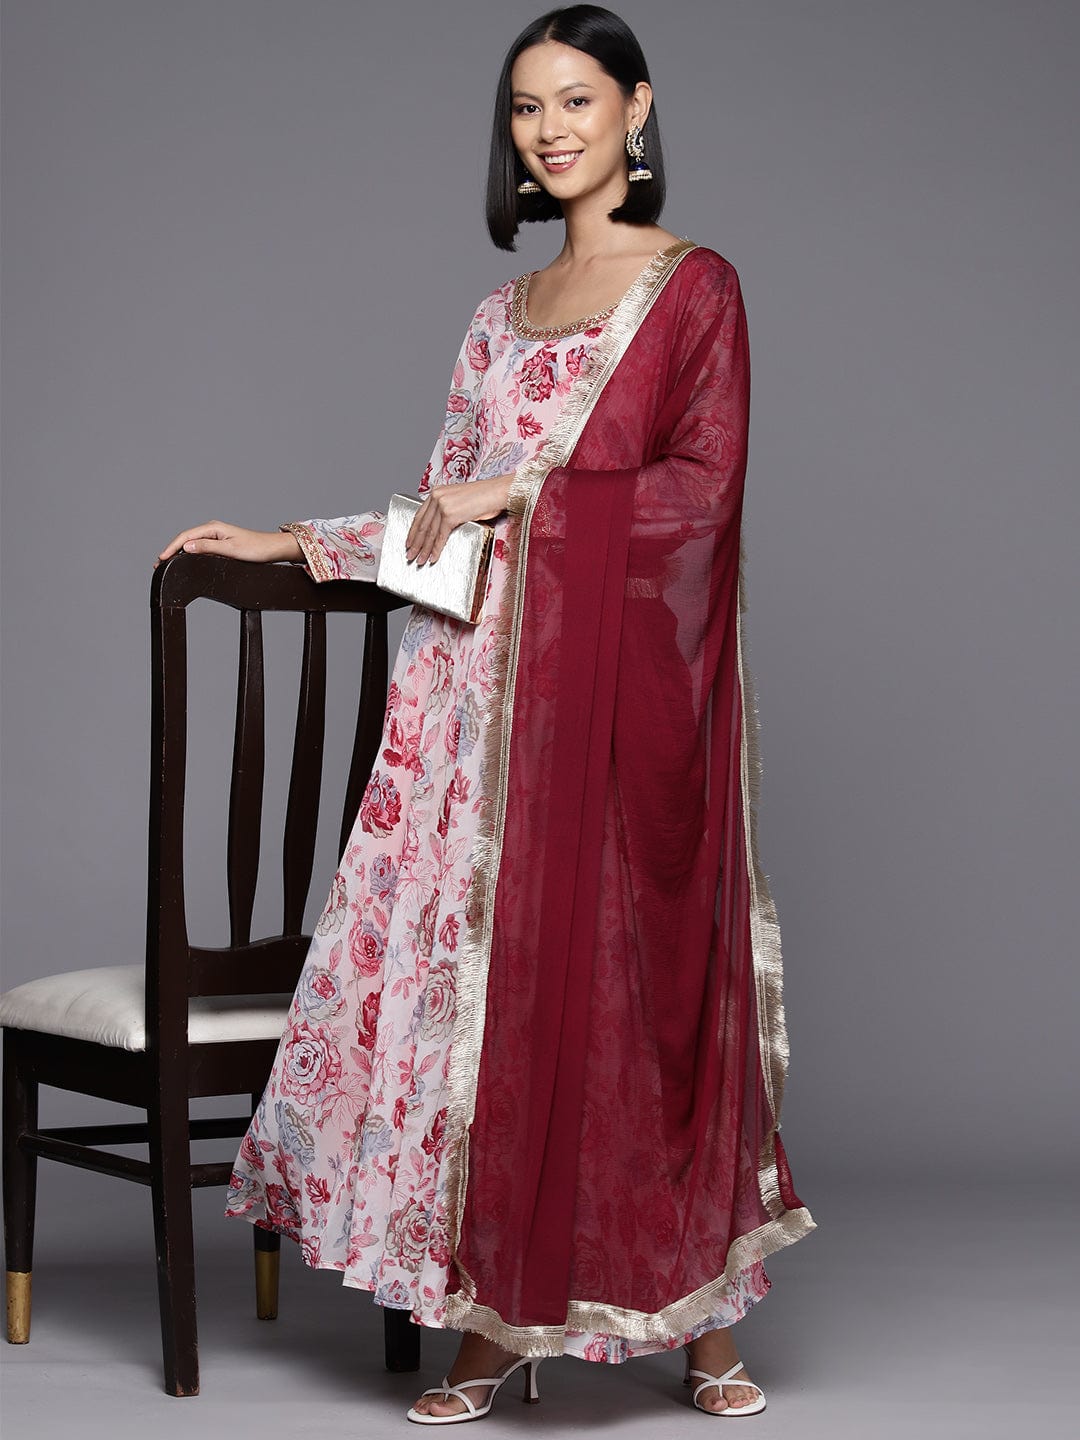 White Floral Printed Anarkali Kurta Paired With Solid Dupatta